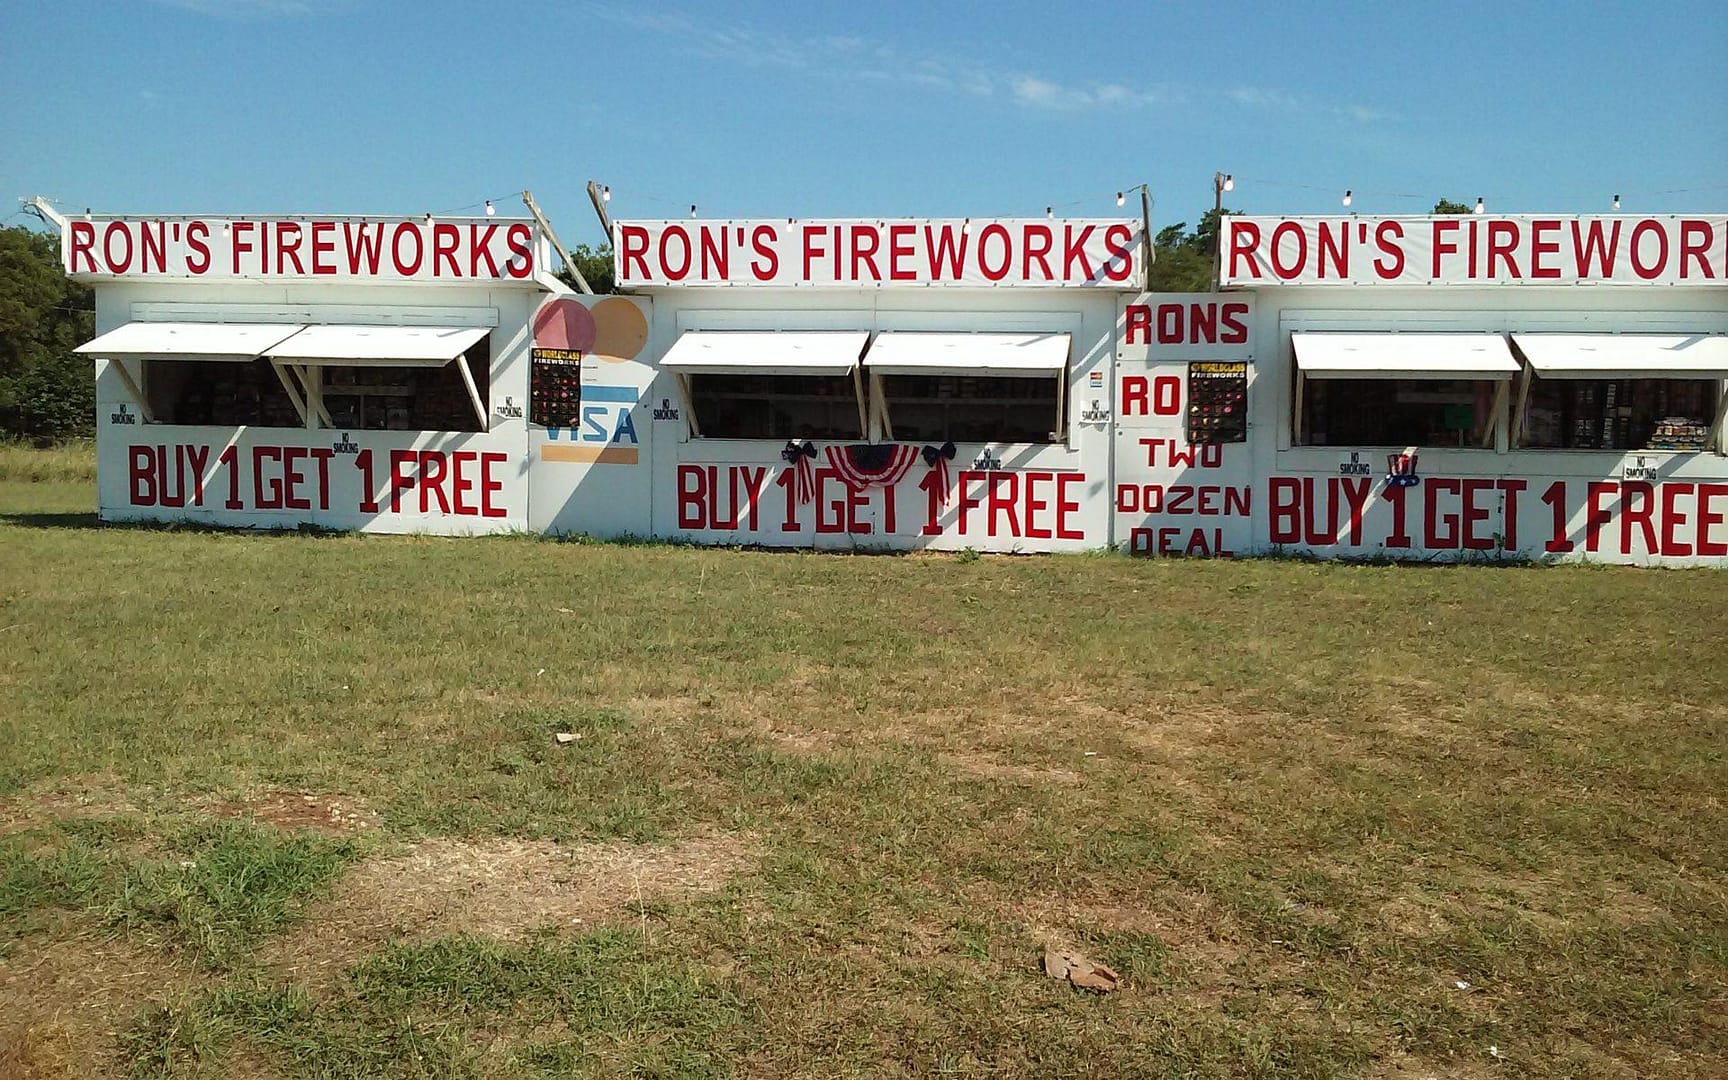 Ron's Fireworks Stand in Texas